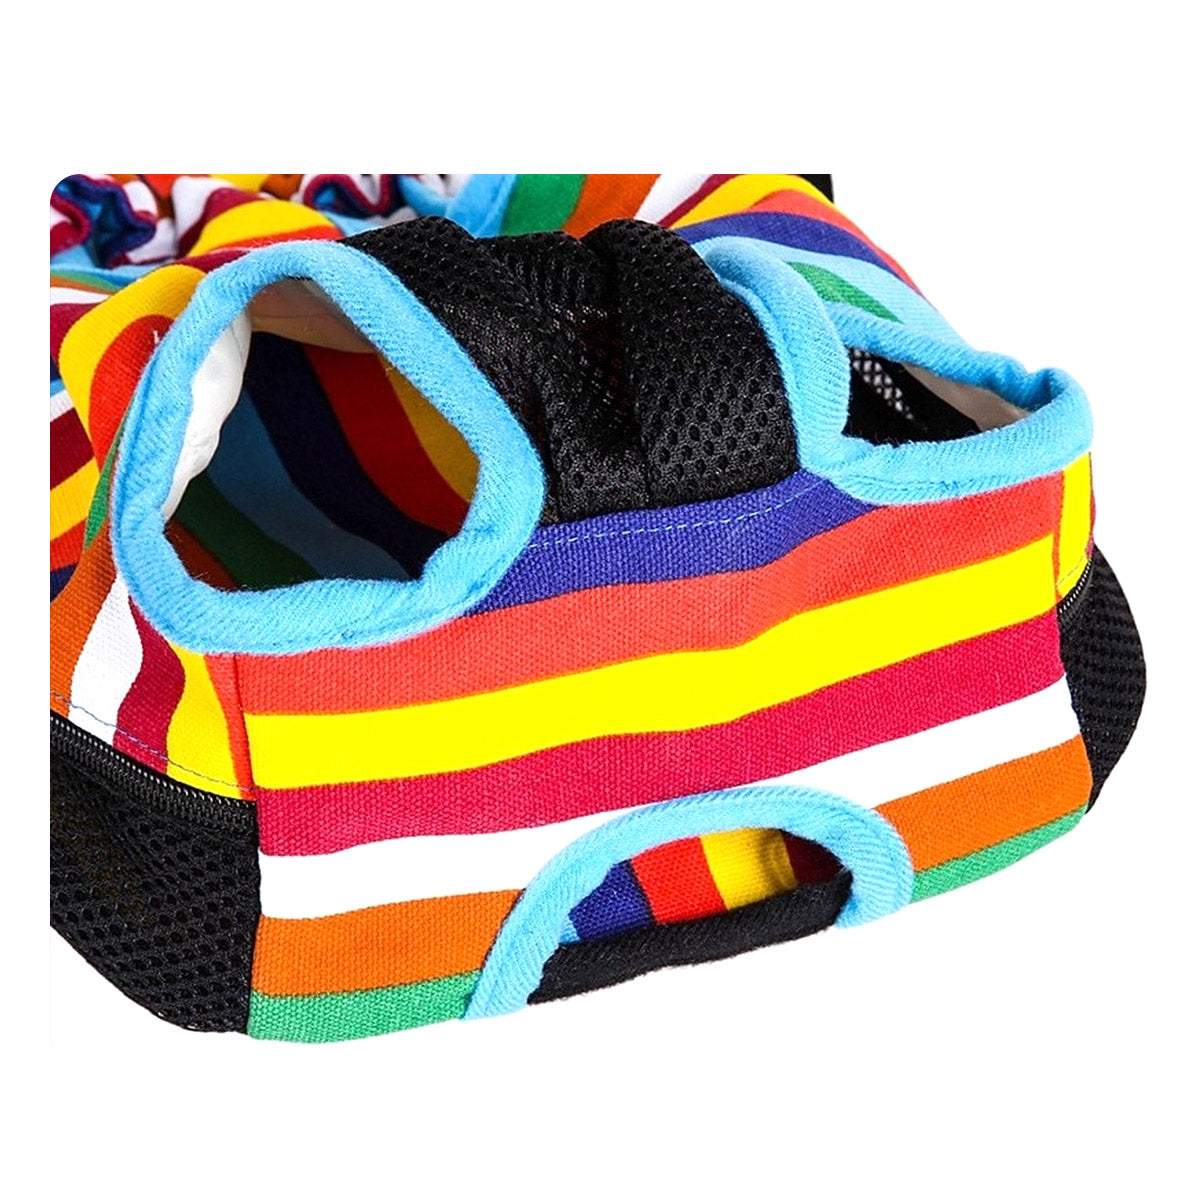 <tc>Ariko</tc> dog carrier - backpack - carrier bag - dog backpack - dog carrier - also for your cat - rainbow